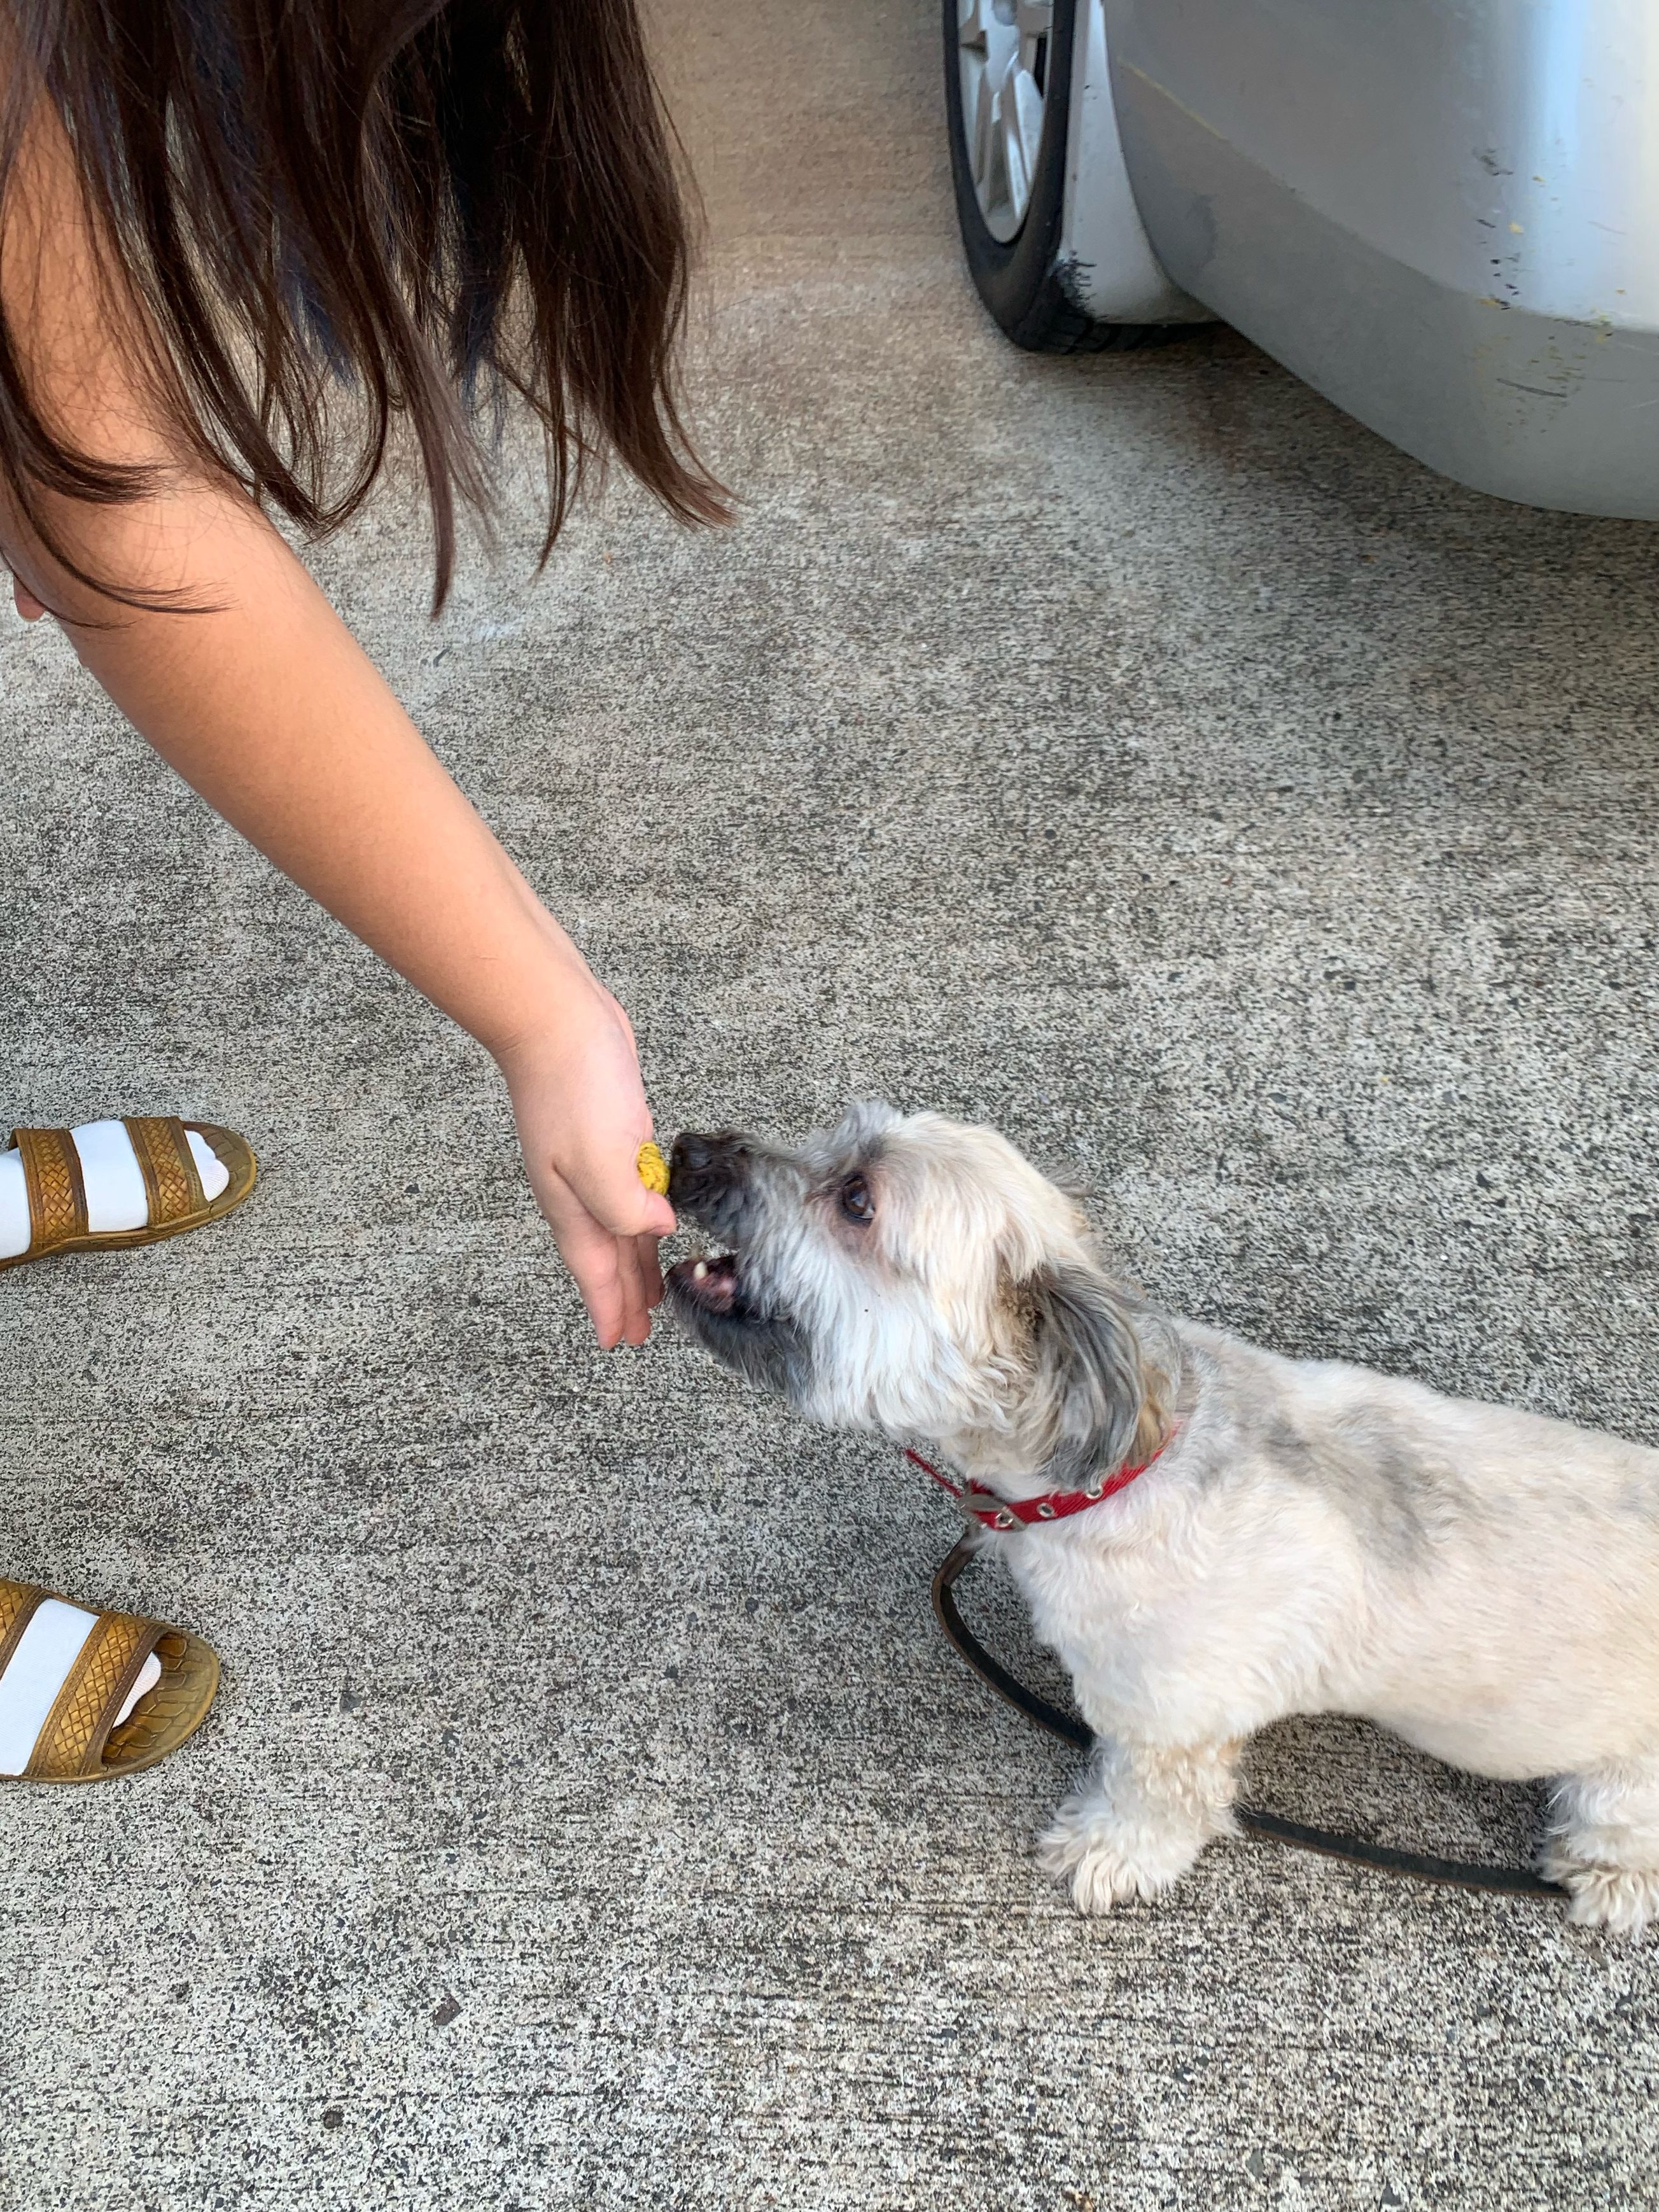 Dog being feed our dog treats